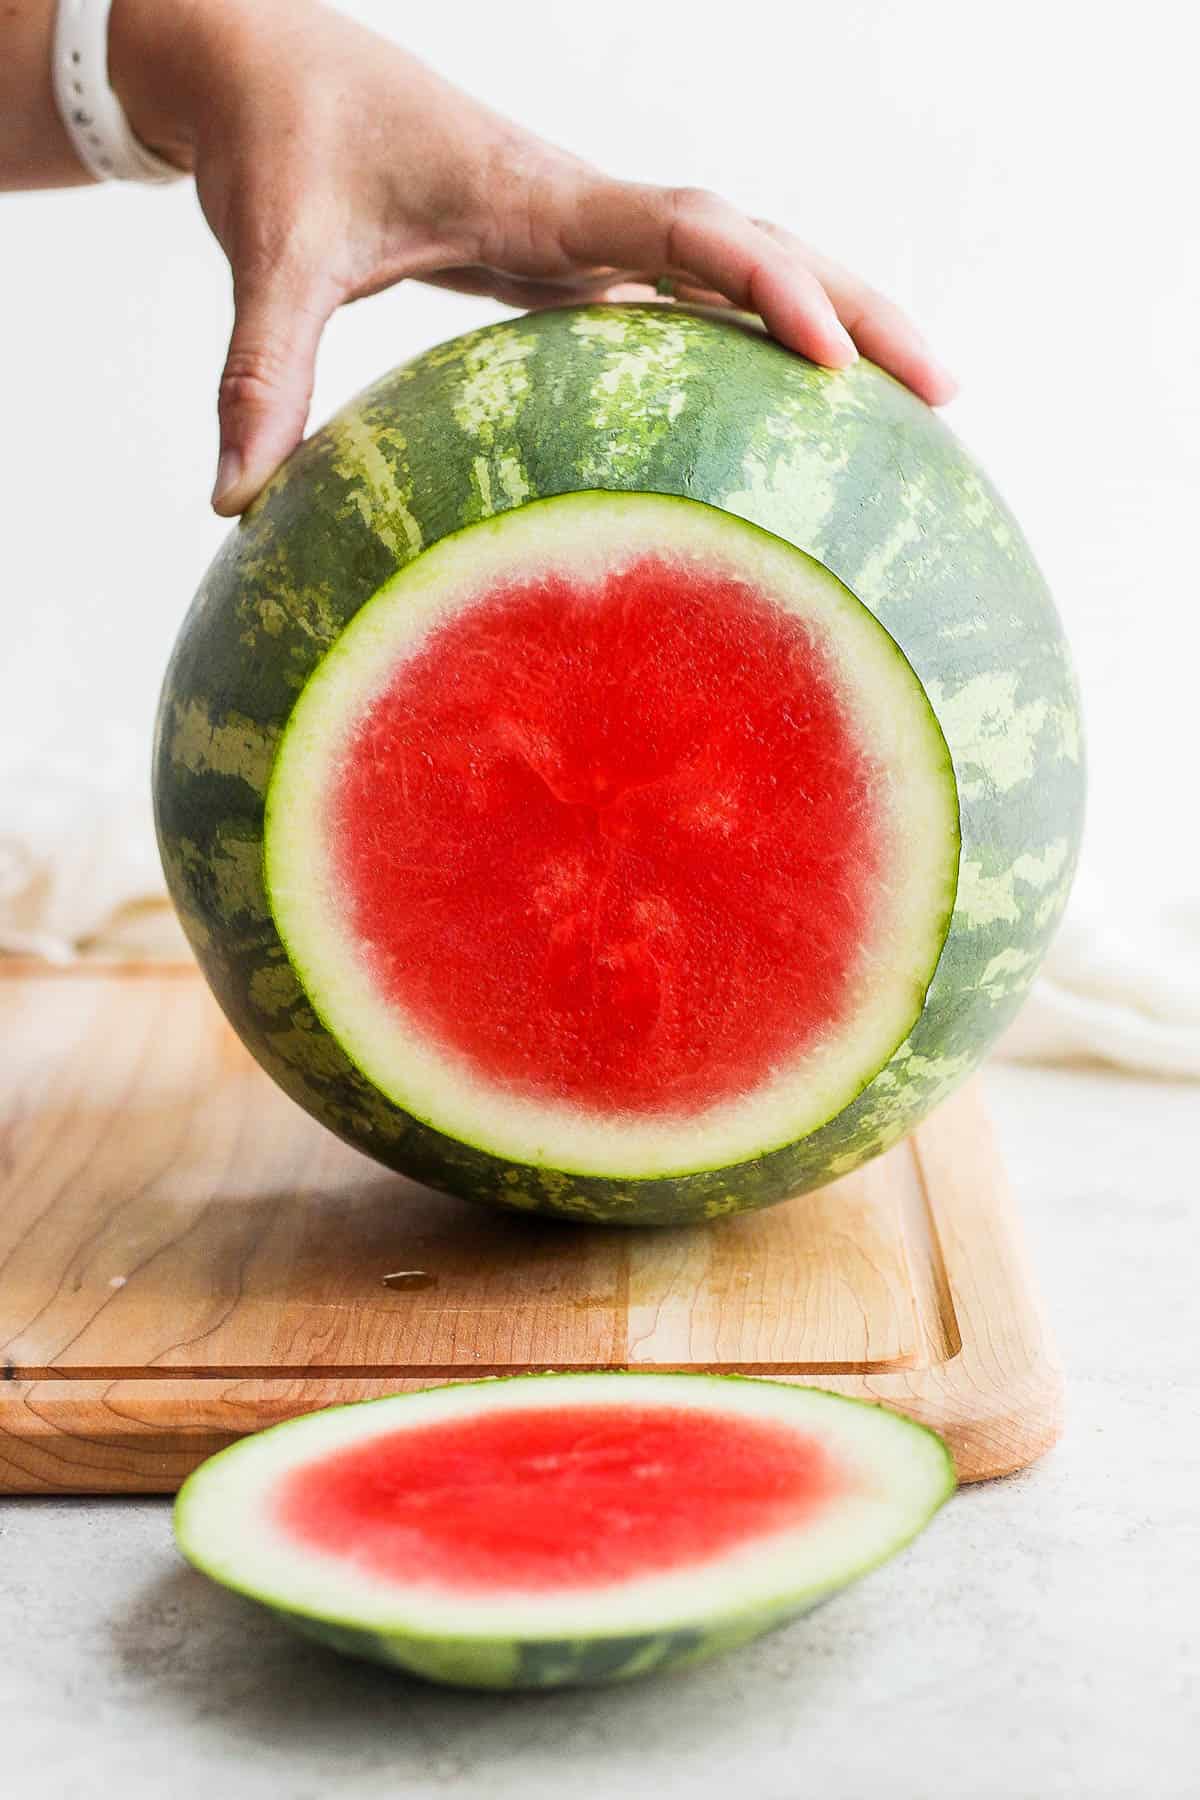 The end of a watermelon half cut off.